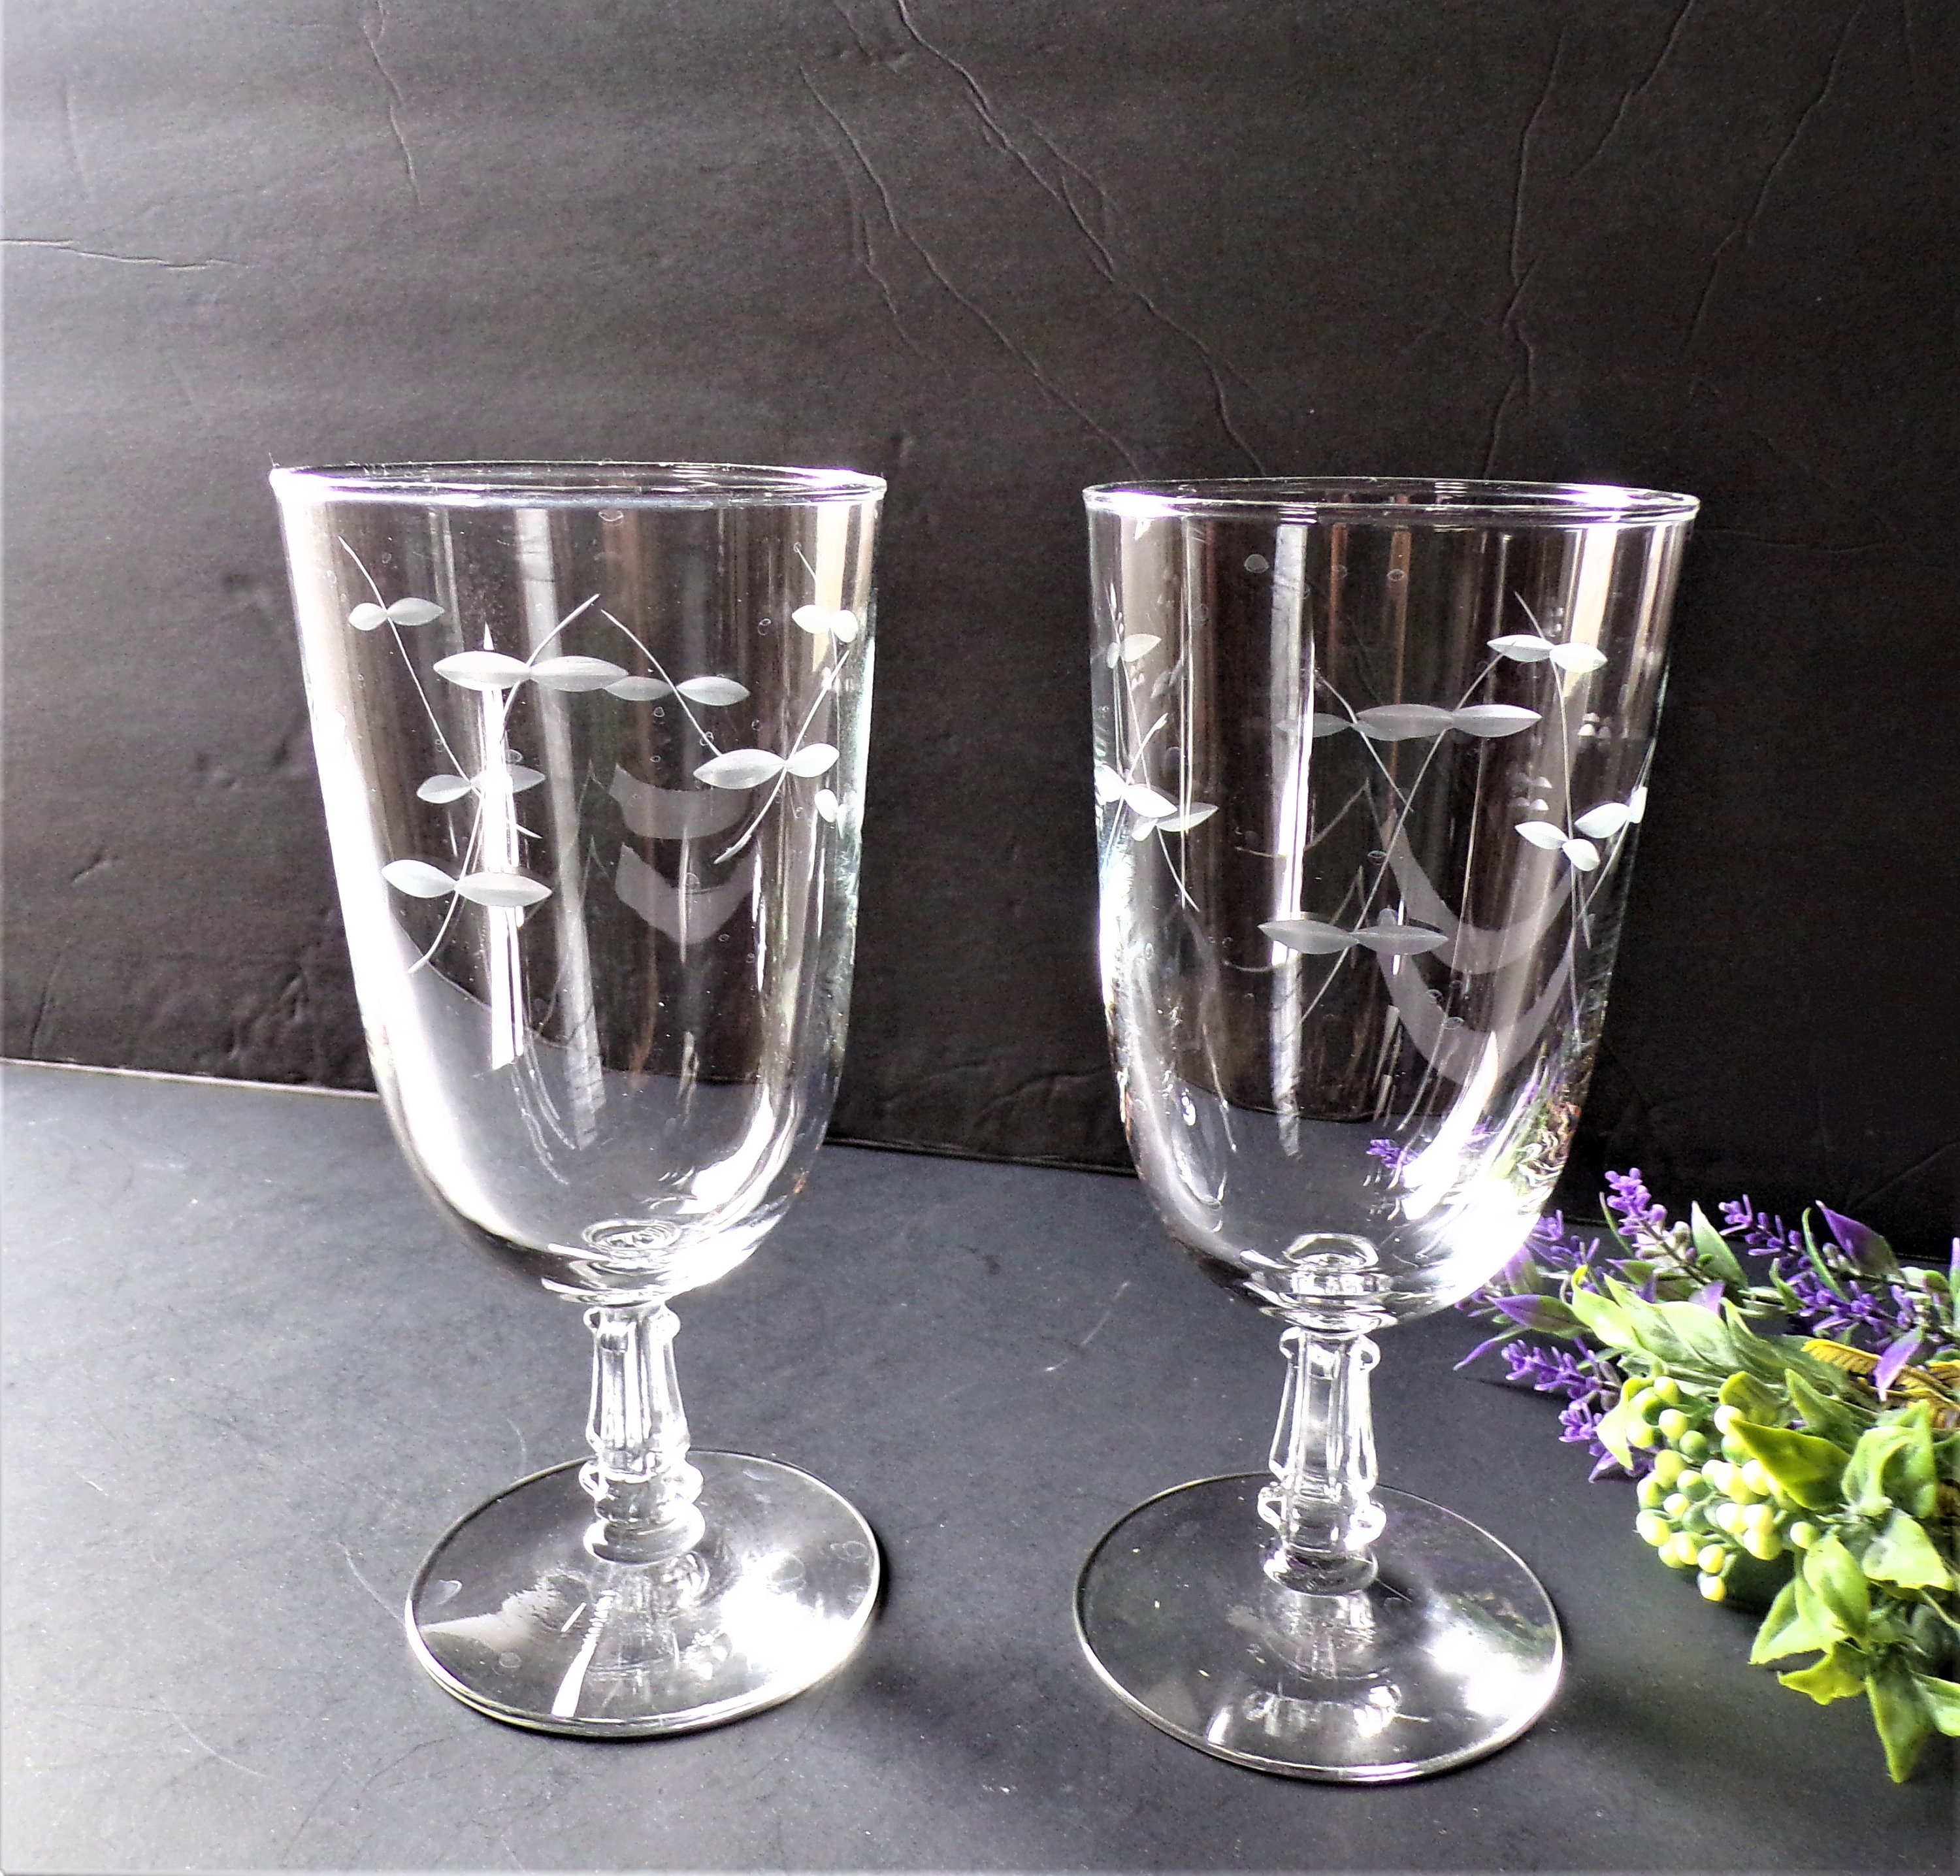 Vintage Etched Iced Tea Glasses by The Libbey Glass Company - Set of 12